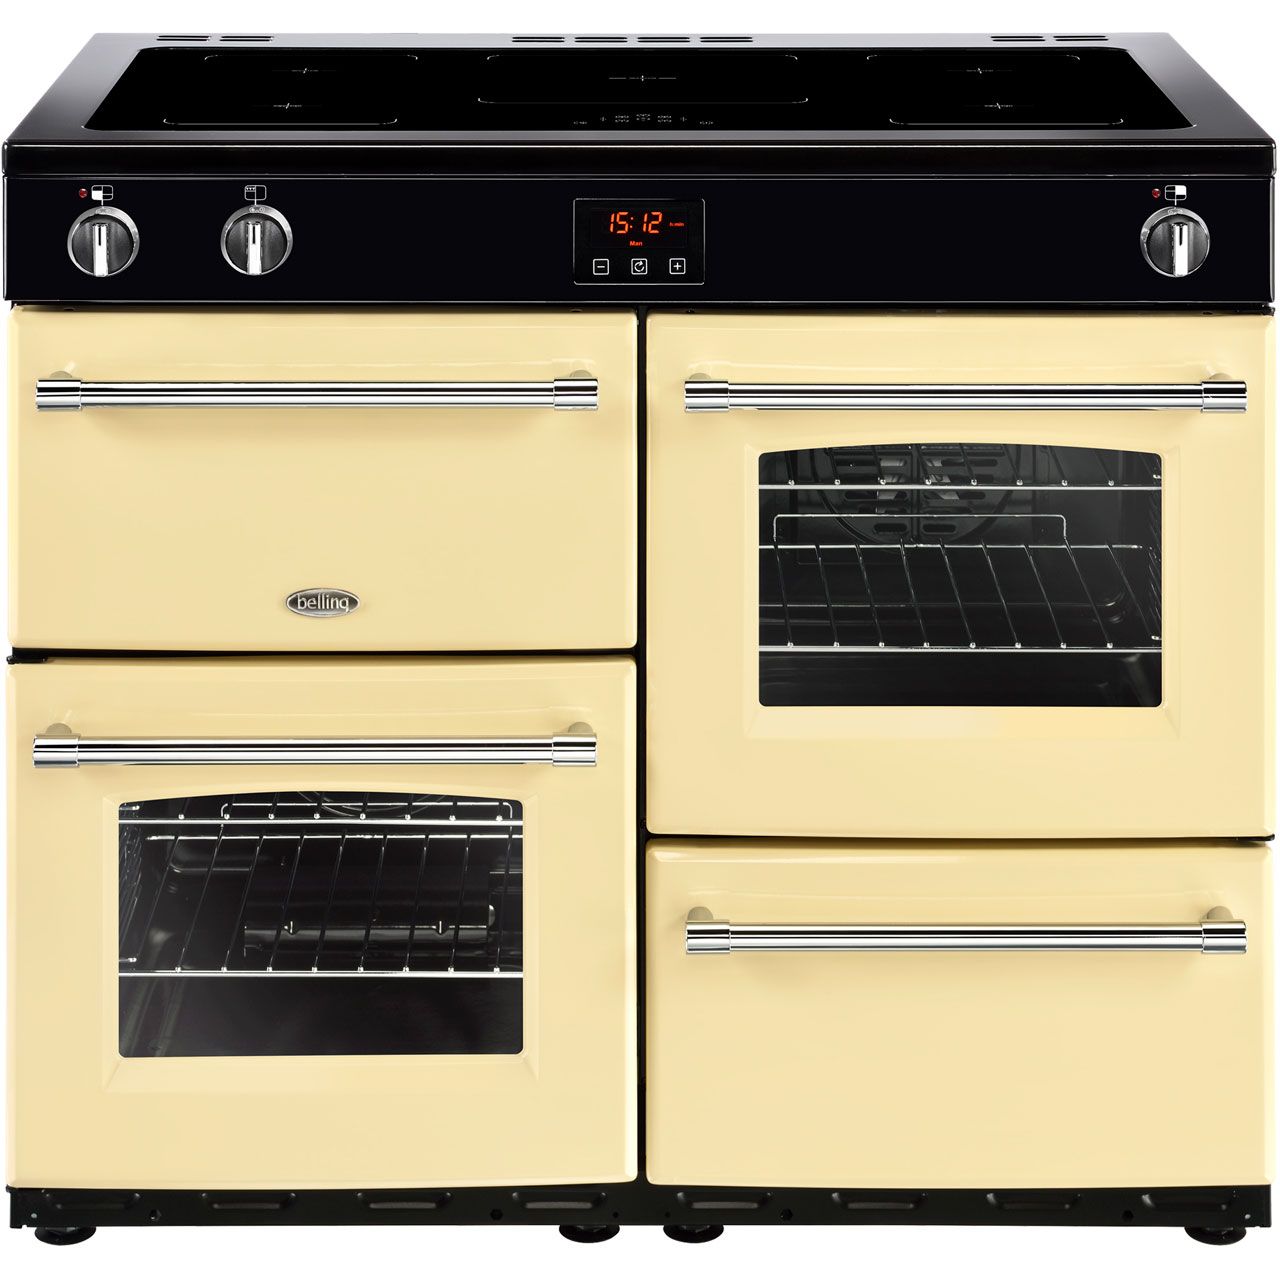 Belling Farmhouse100Ei 100cm Electric Range Cooker with Induction Hob - Cream - A/A Rated, Cream